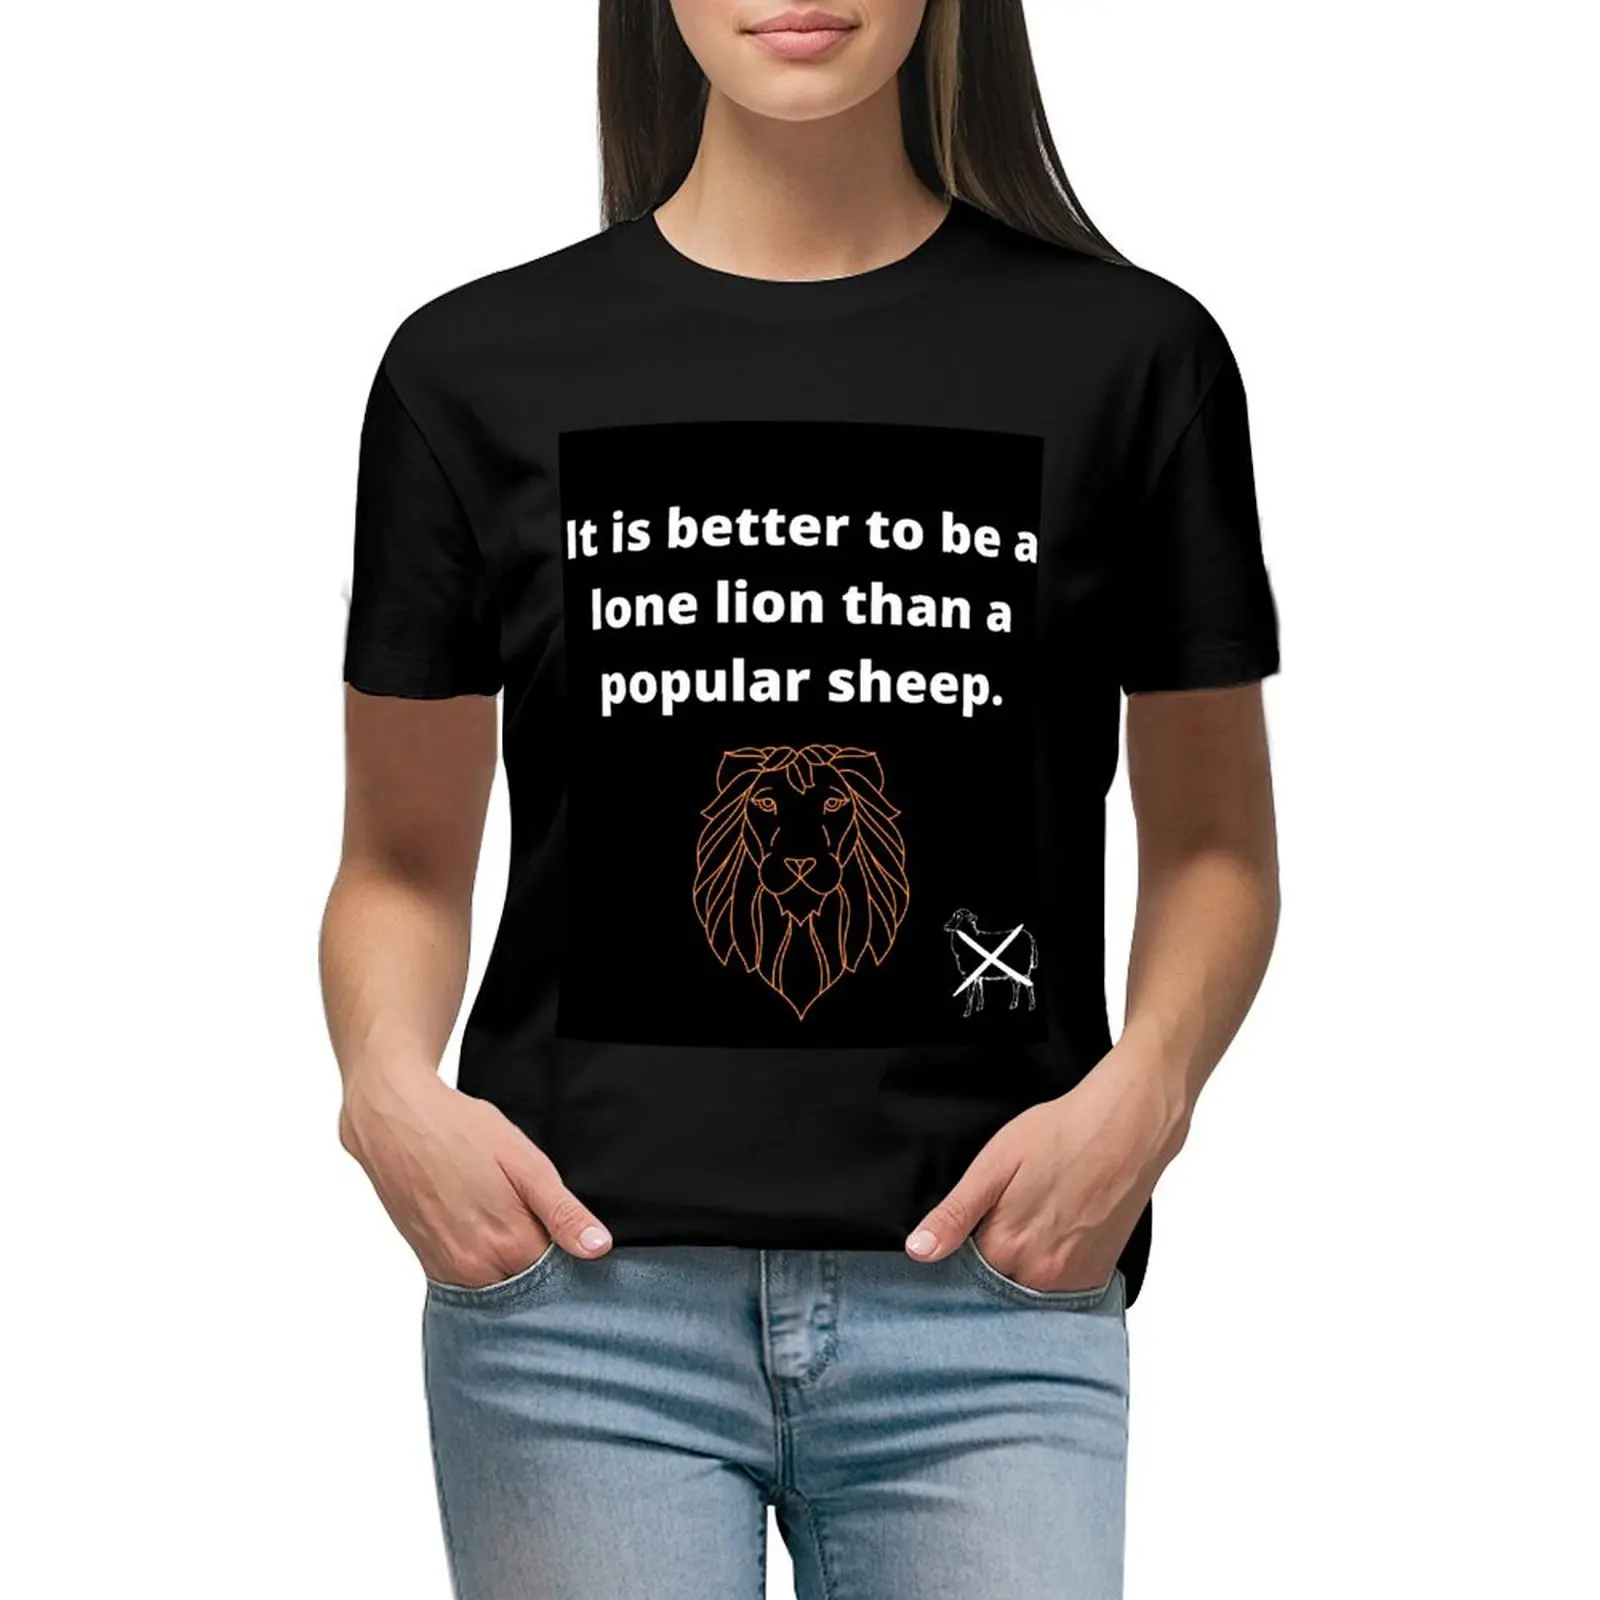 

It is better to be a lone lion than a popular sheep. T-shirt summer clothes shirts graphic tees t-shirt dress for Women graphic